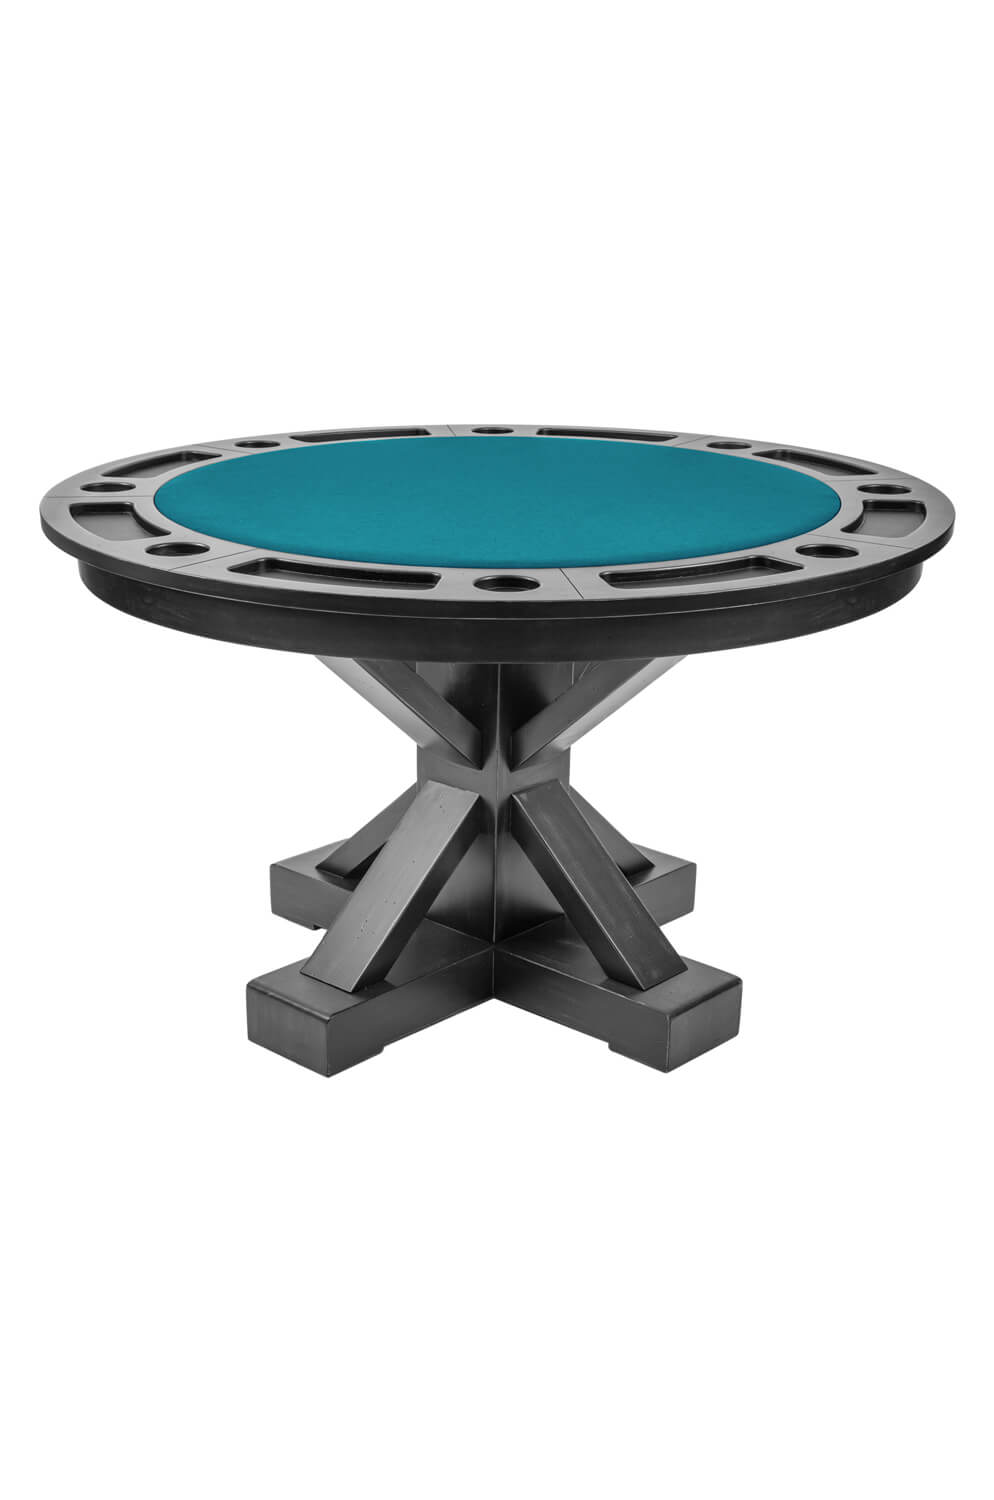 Buy Darafeev's Trestle 8-Player Convertible Poker Dining Table